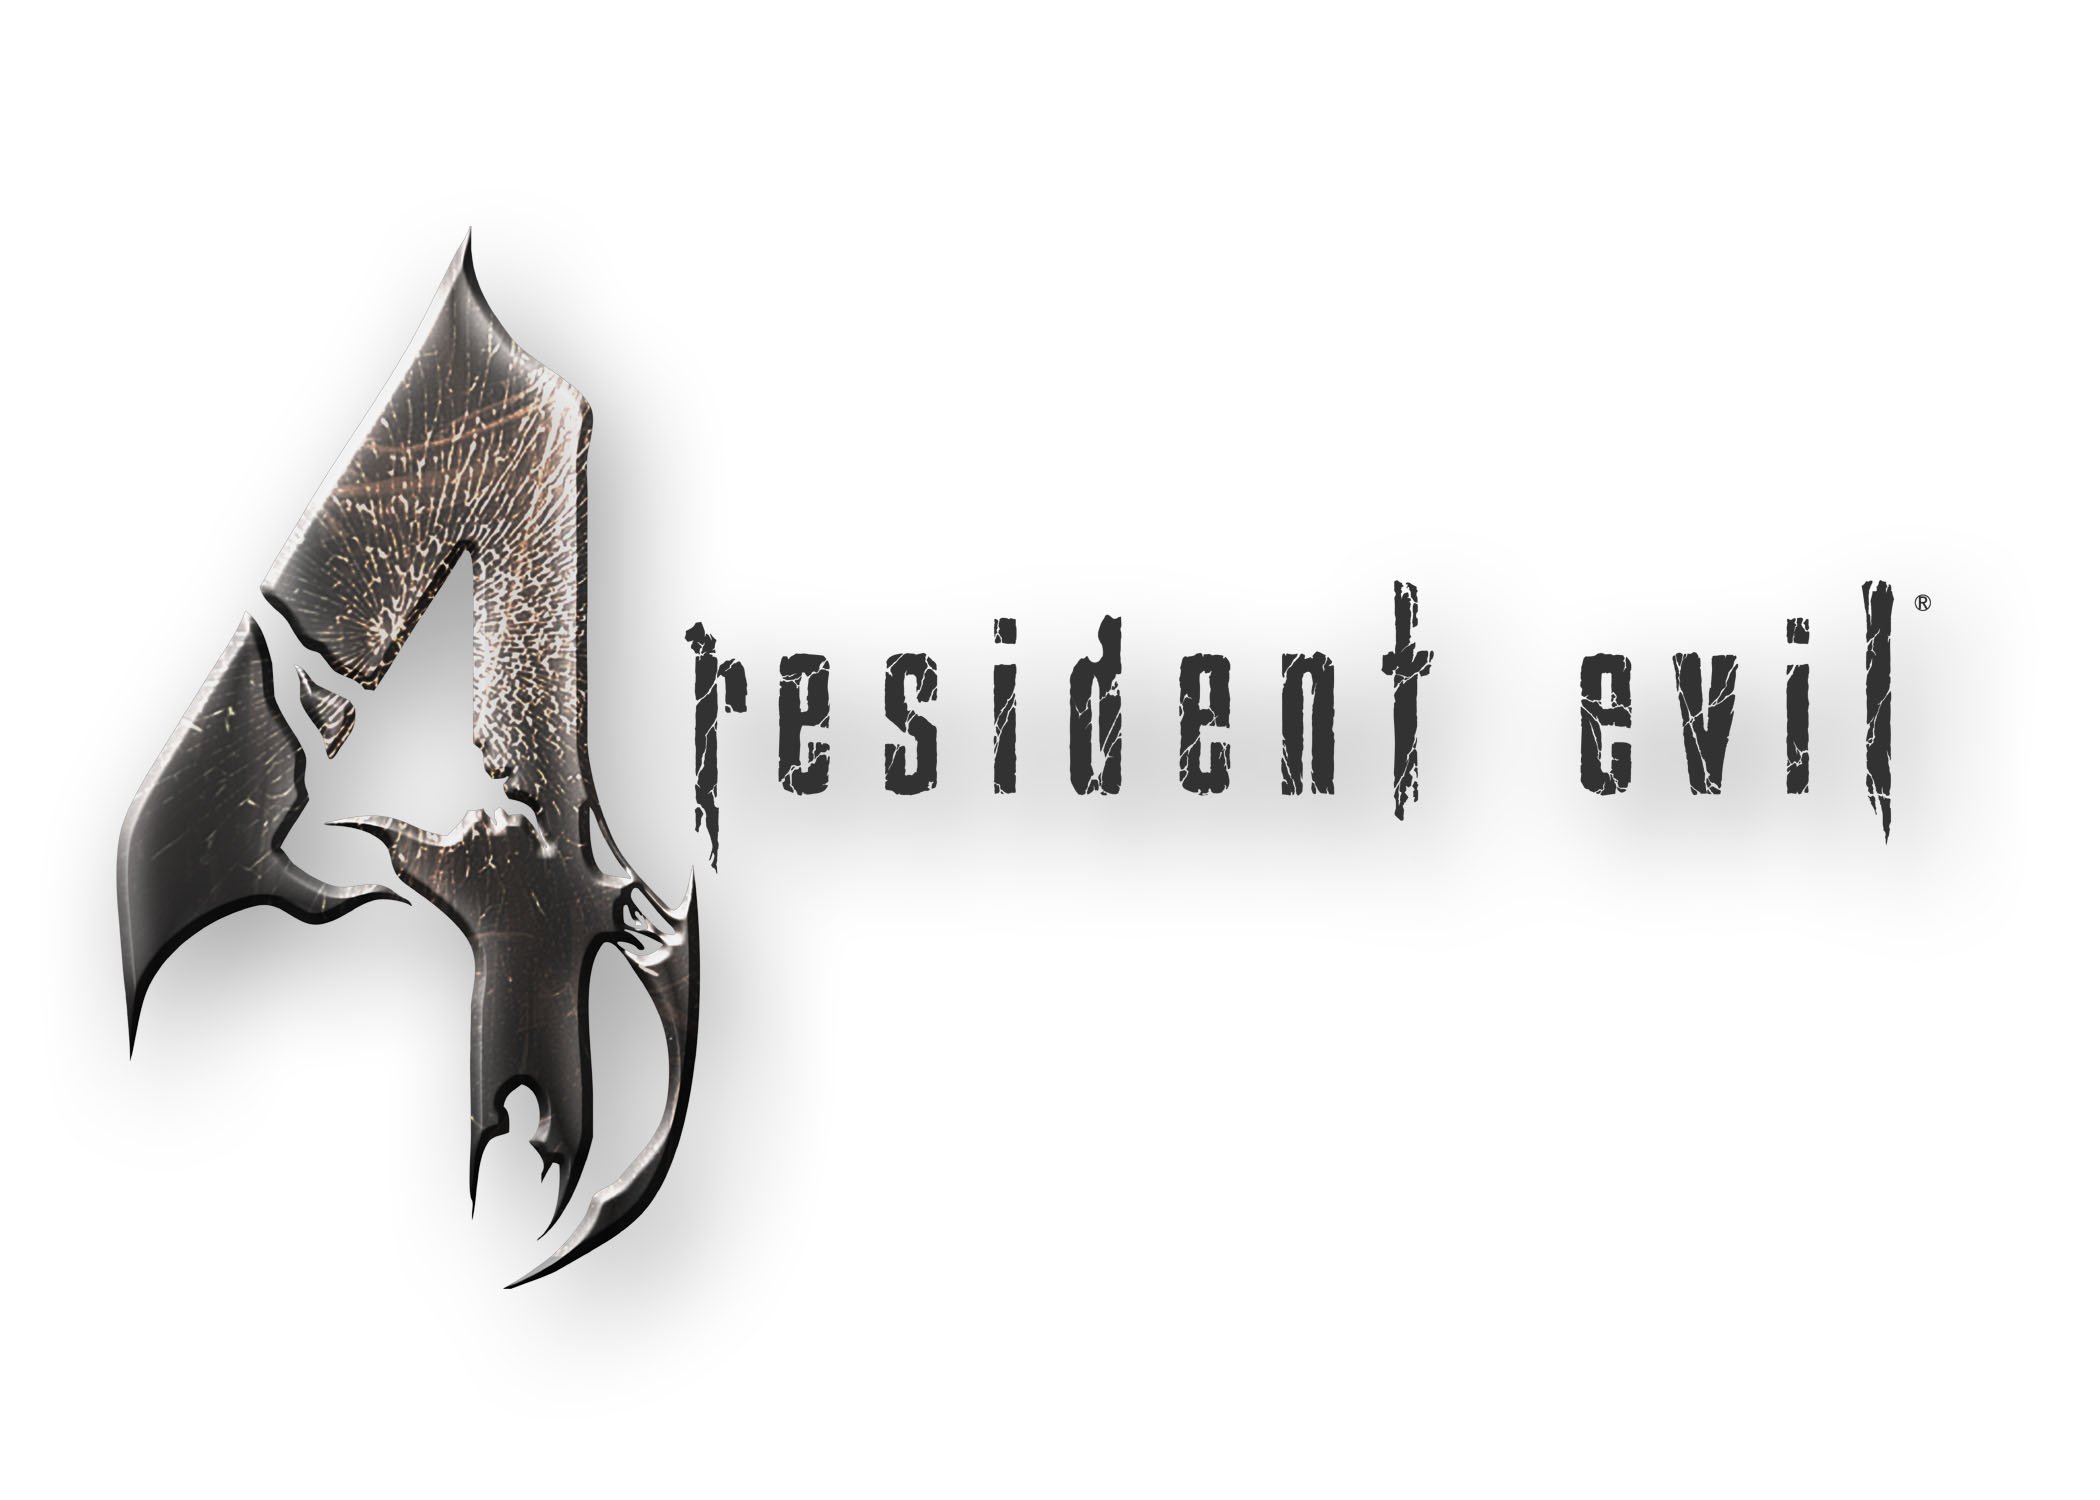 Downloadable content in Resident Evil 4 remake, Resident Evil Wiki